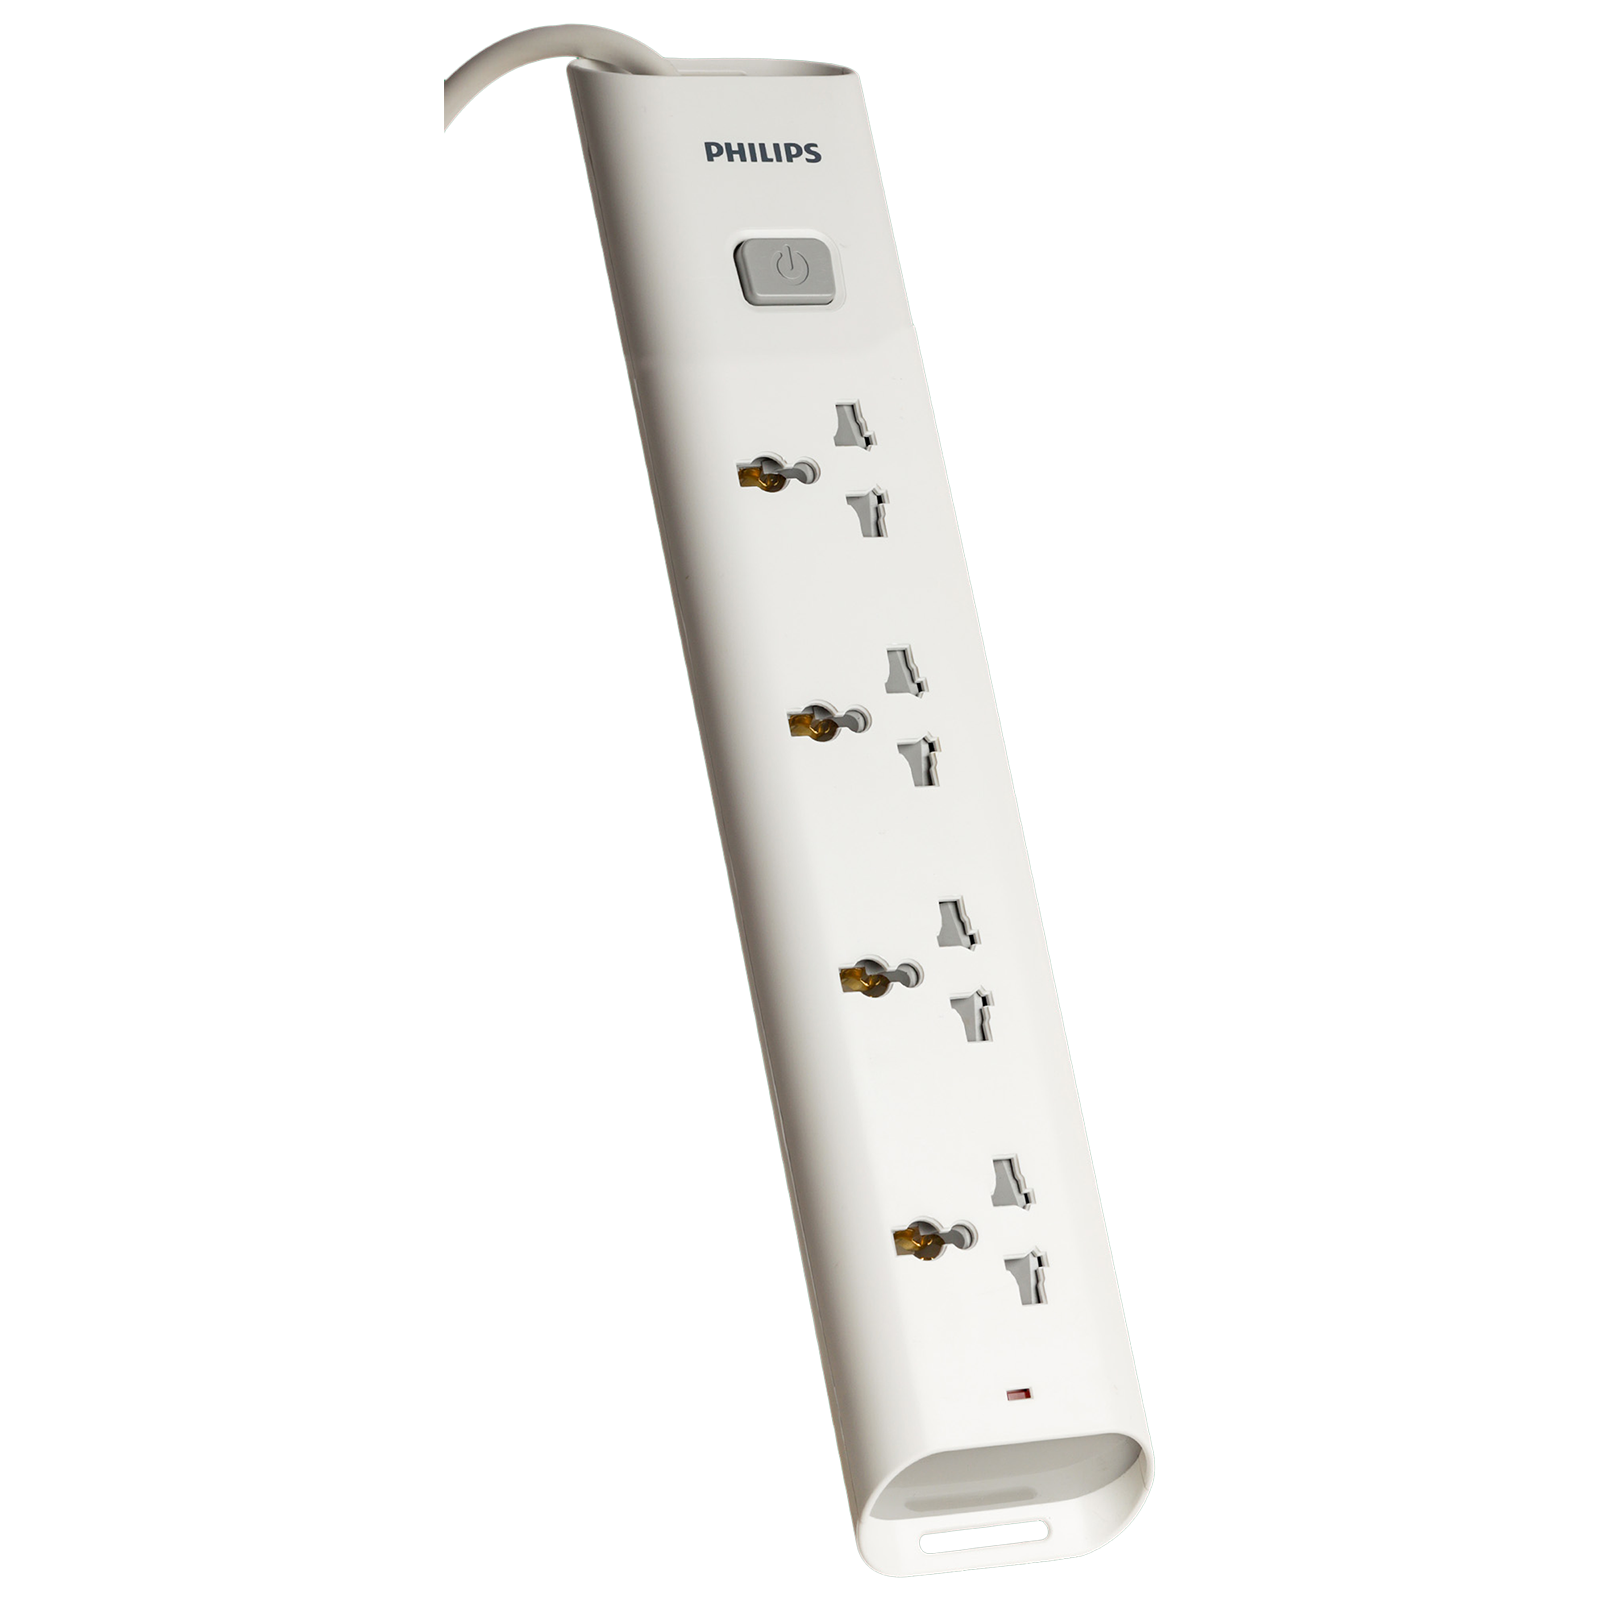 PHILIPS 10 Amps 4 Sockets Power Multiplier (1.2 Meters, Child Safety Shutter, CHP2442W/94, White)